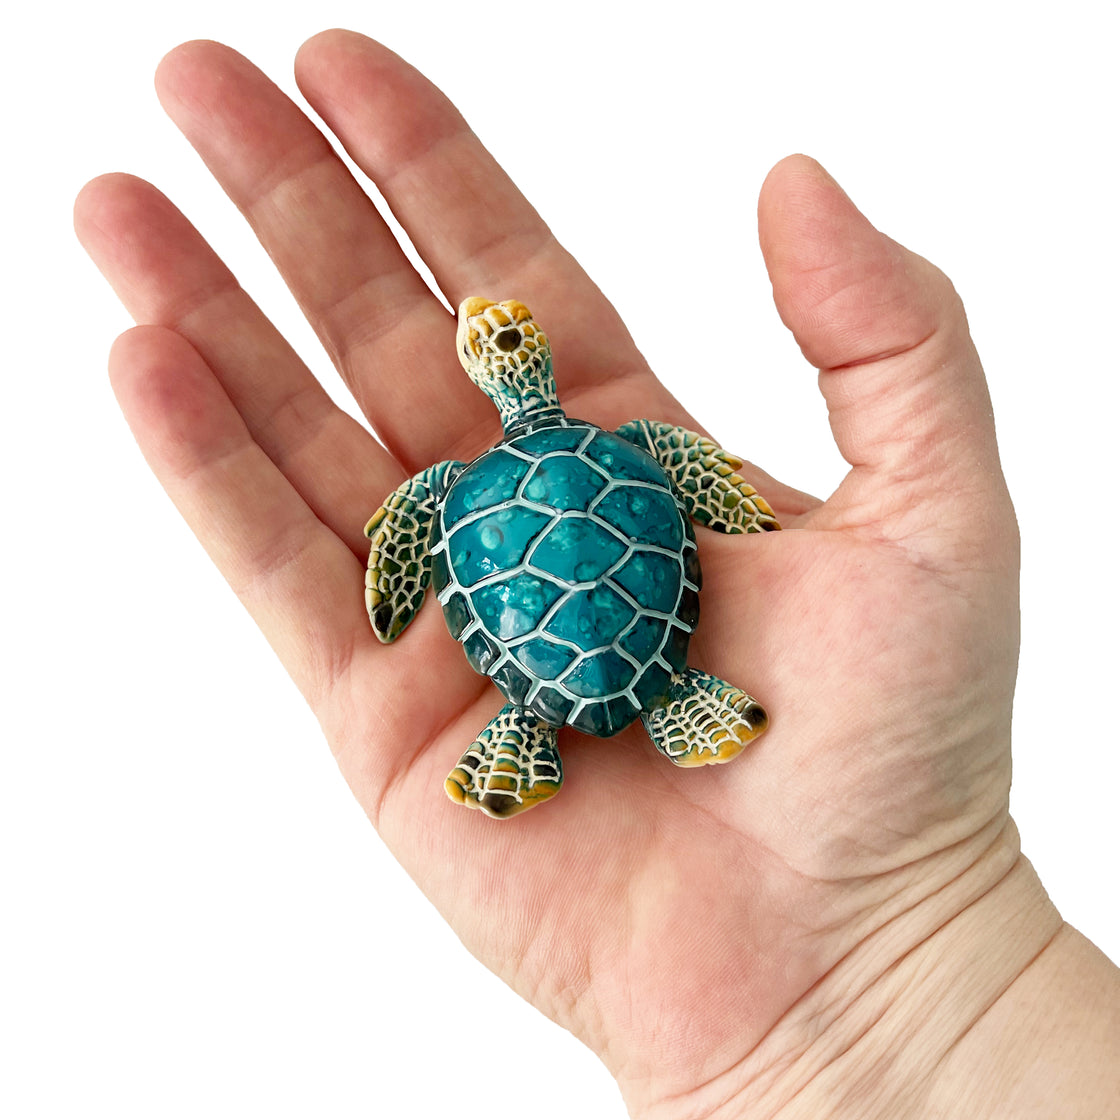 A close-up view of a Rengora turtle magnet held in the palm of a hand